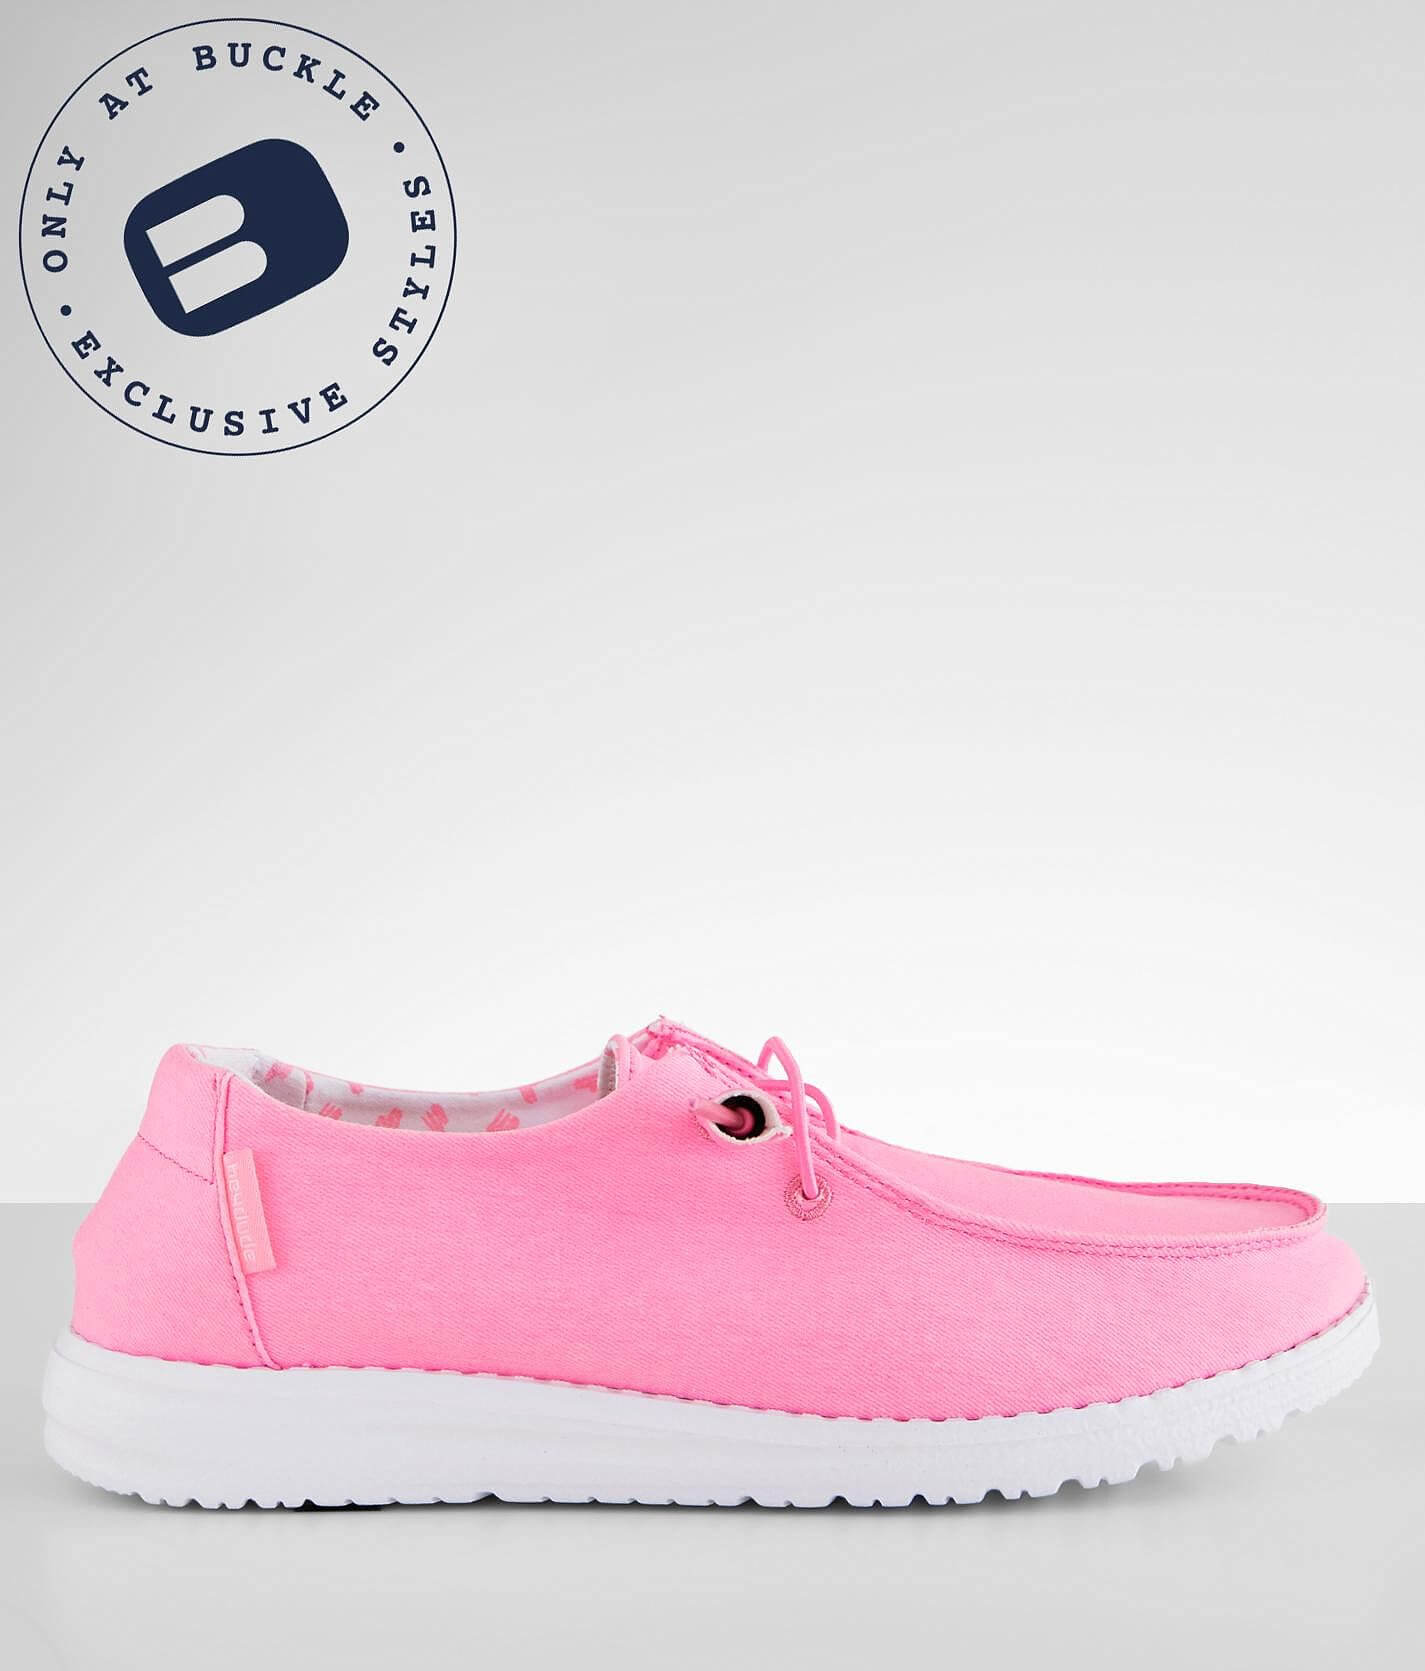 Womens Pink Shoes.